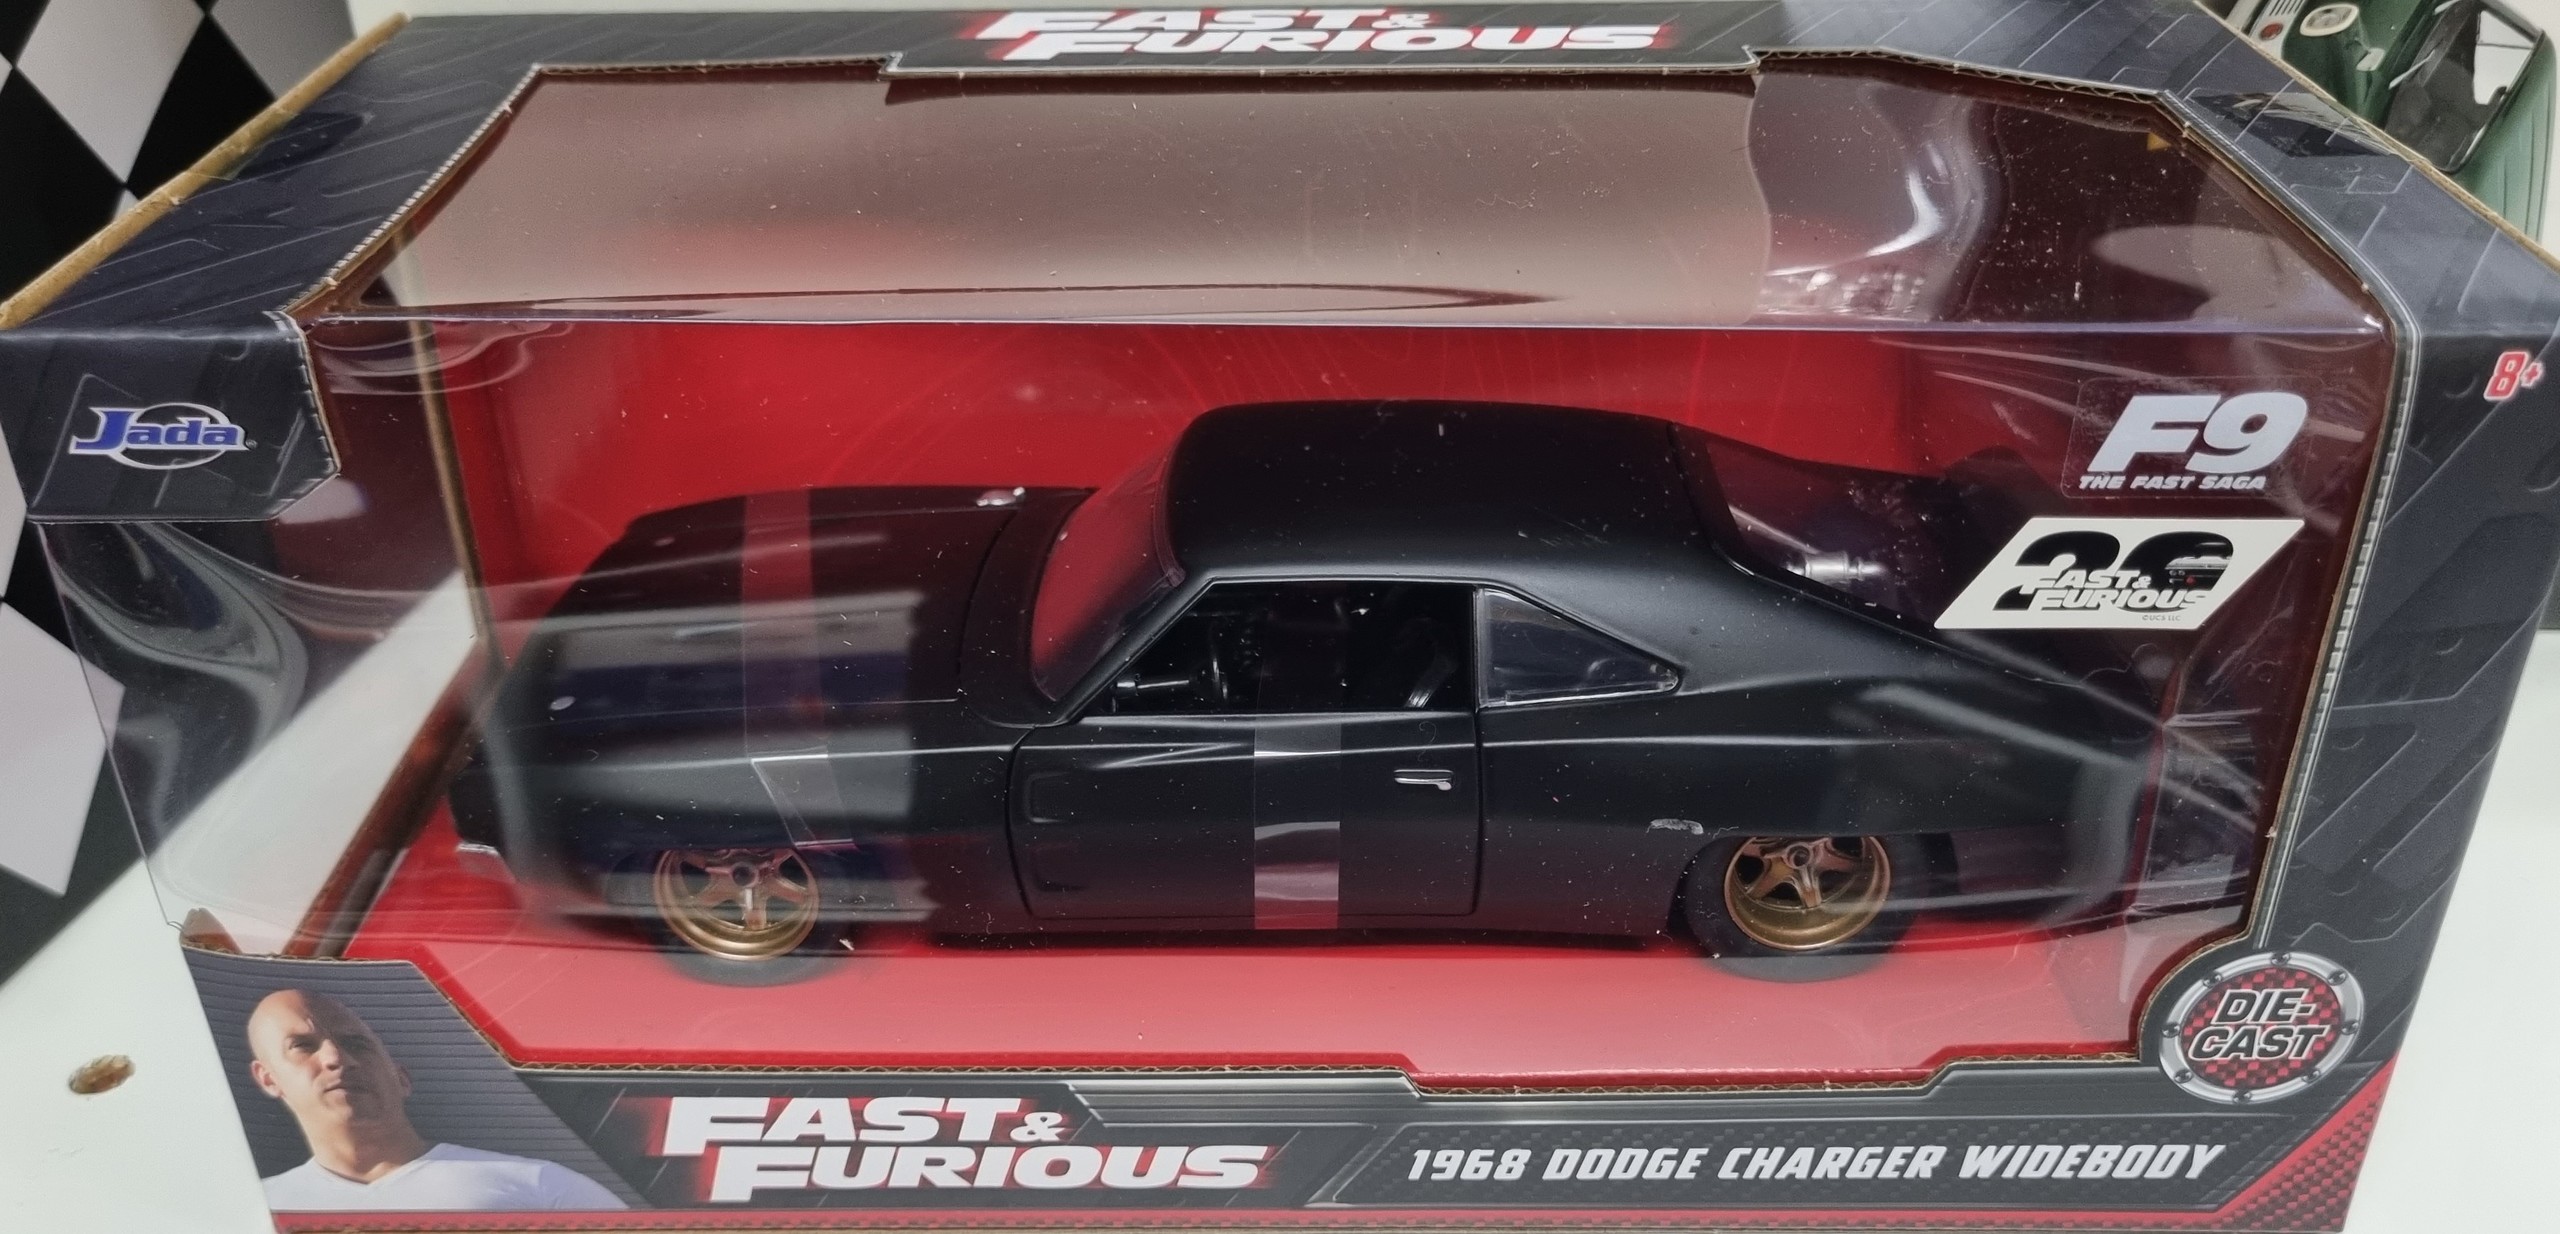 Fast & Furious 1968 Dodge Charger Widebody 1/24 Jada